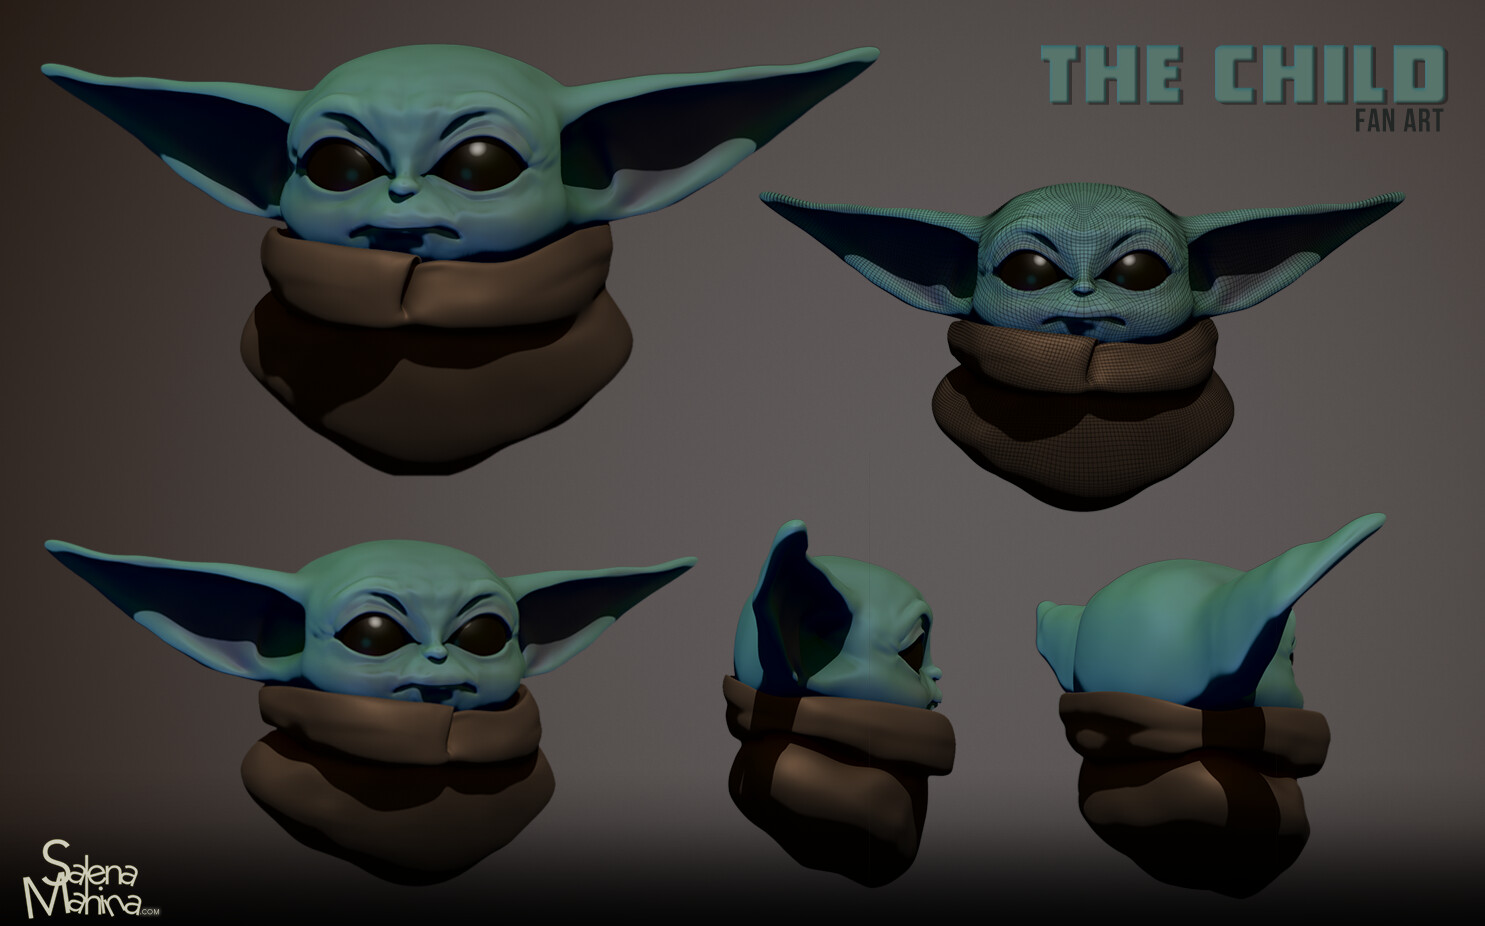 Baby Yoda: 3D Fan Art - Real-time + Timelapse video - ZBrushCentral